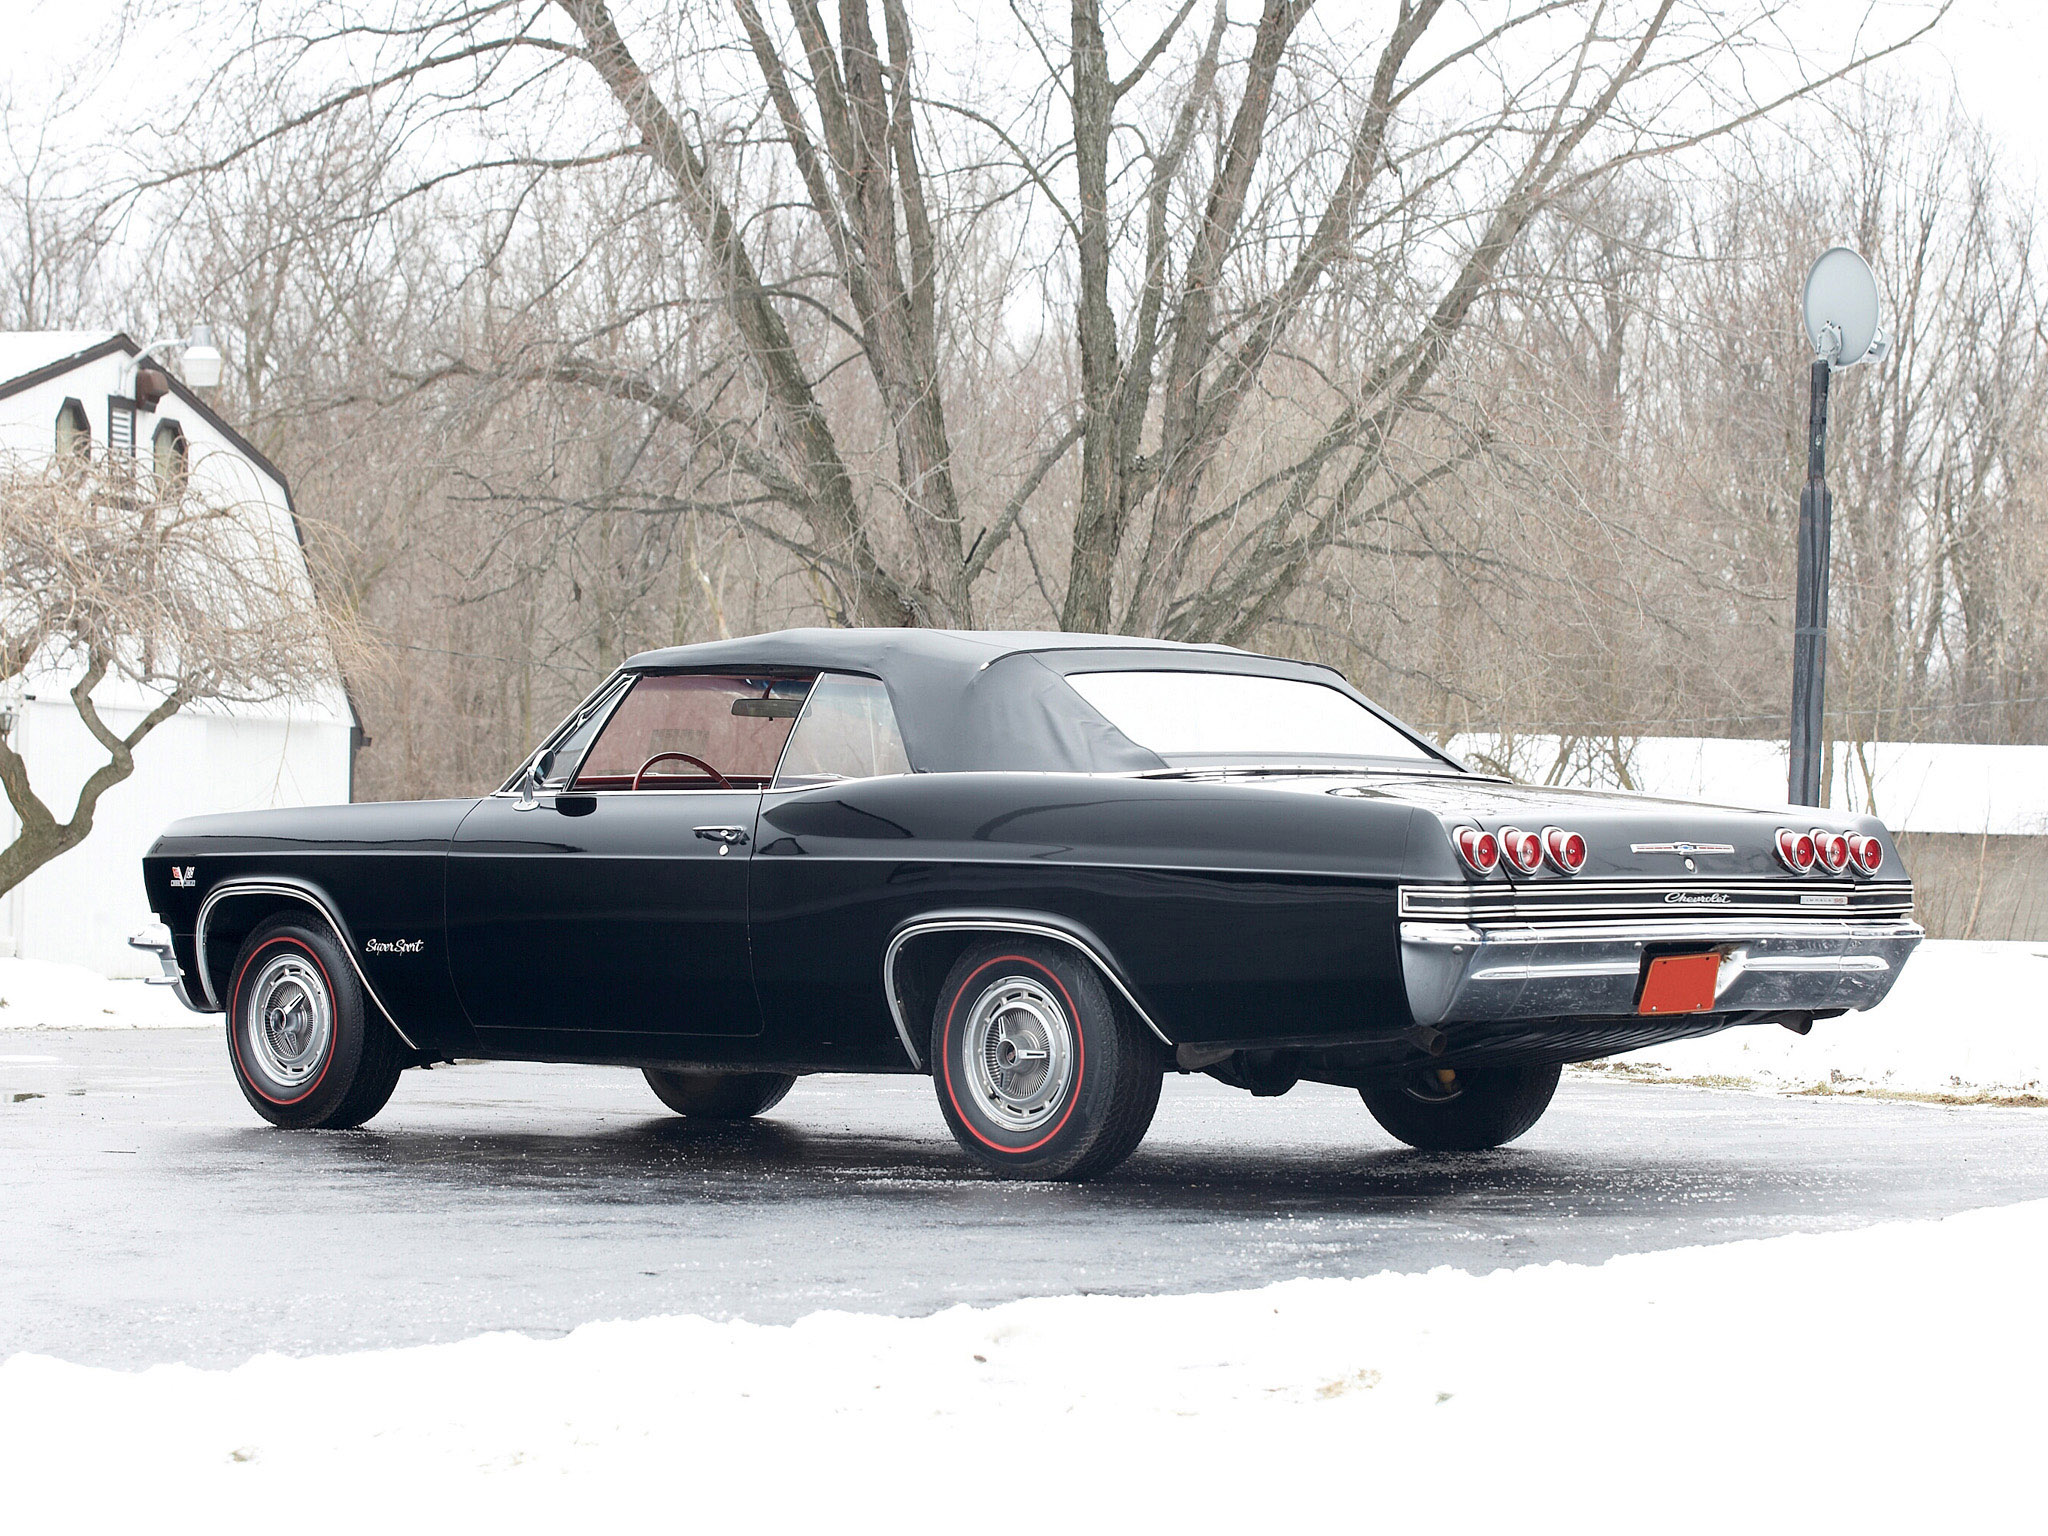 1965, Chevrolet, Impala, S s, Convertible, Muscle, Classic Wallpaper